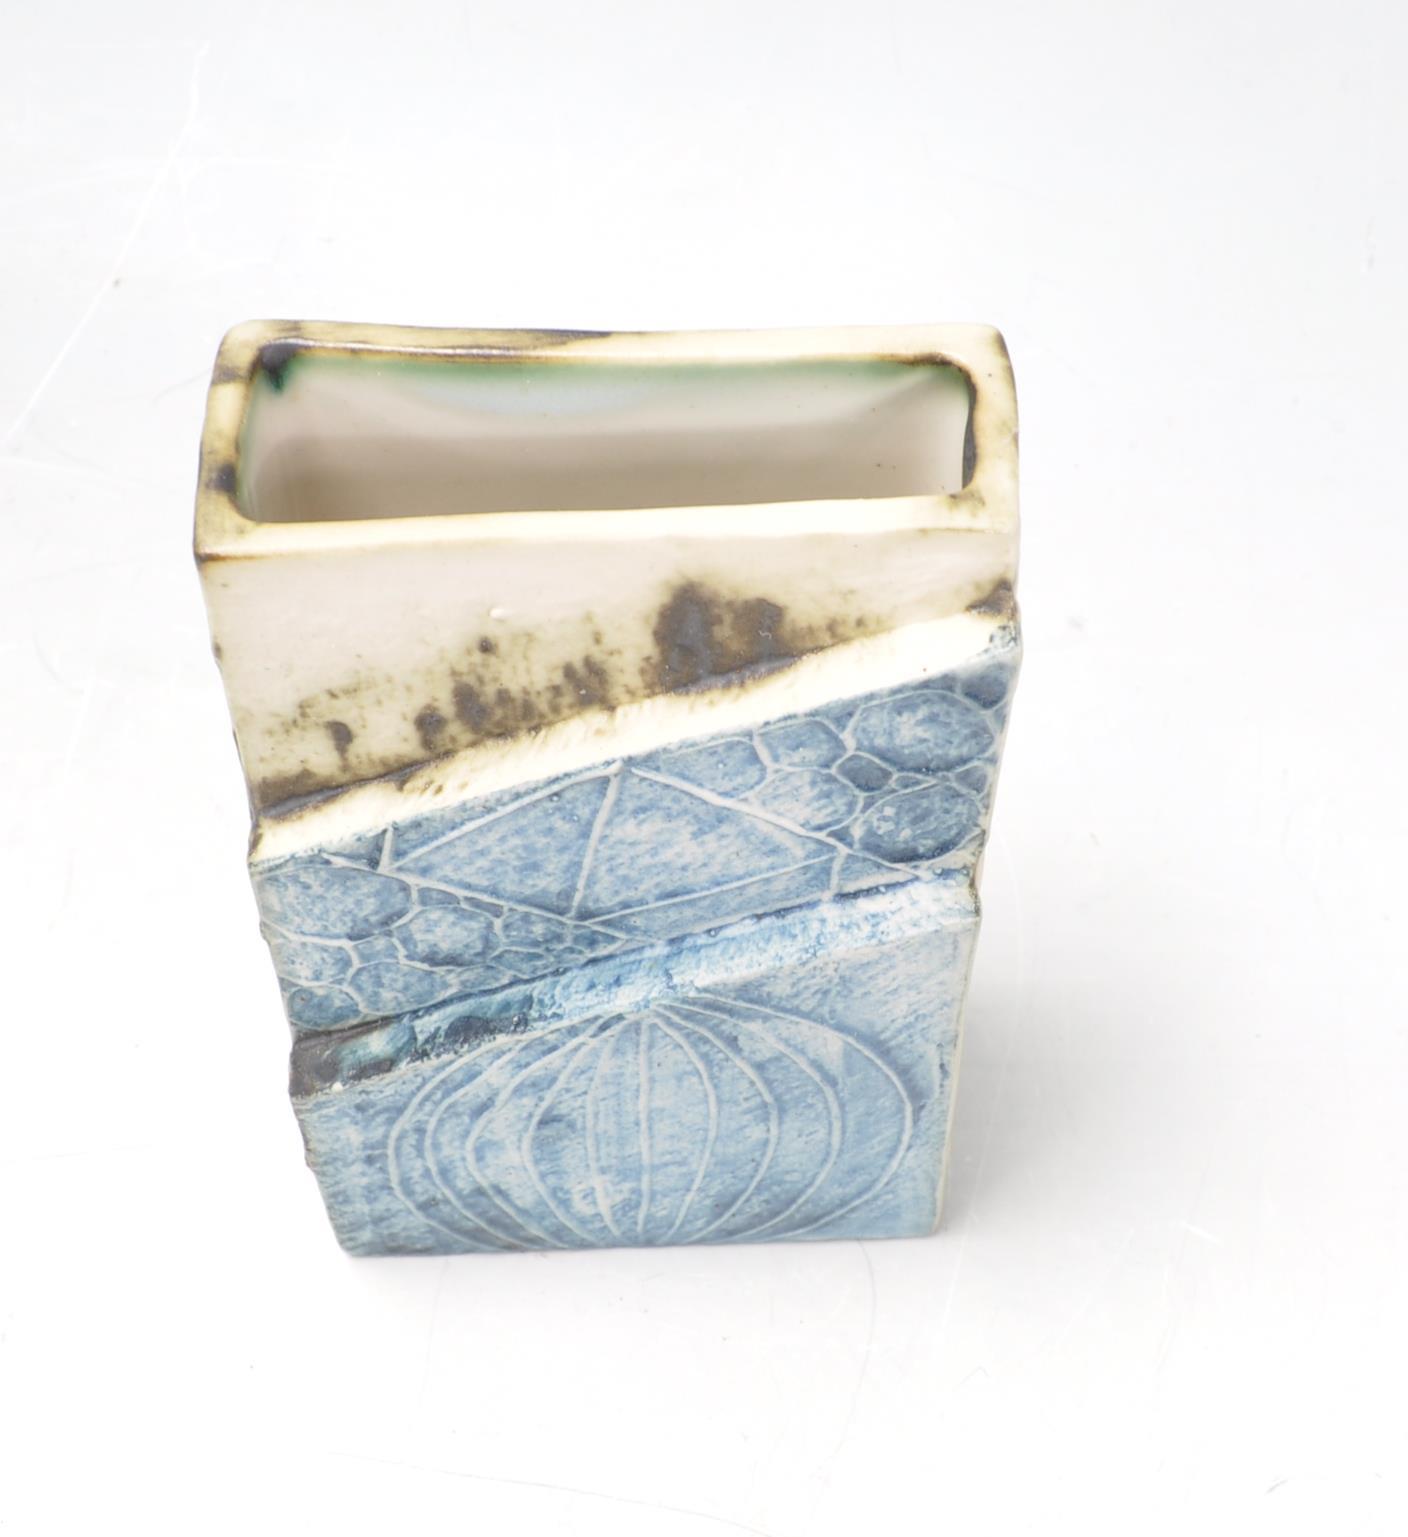 COLLECTION OF CARN STUDIO ART POTTERY - Image 3 of 10